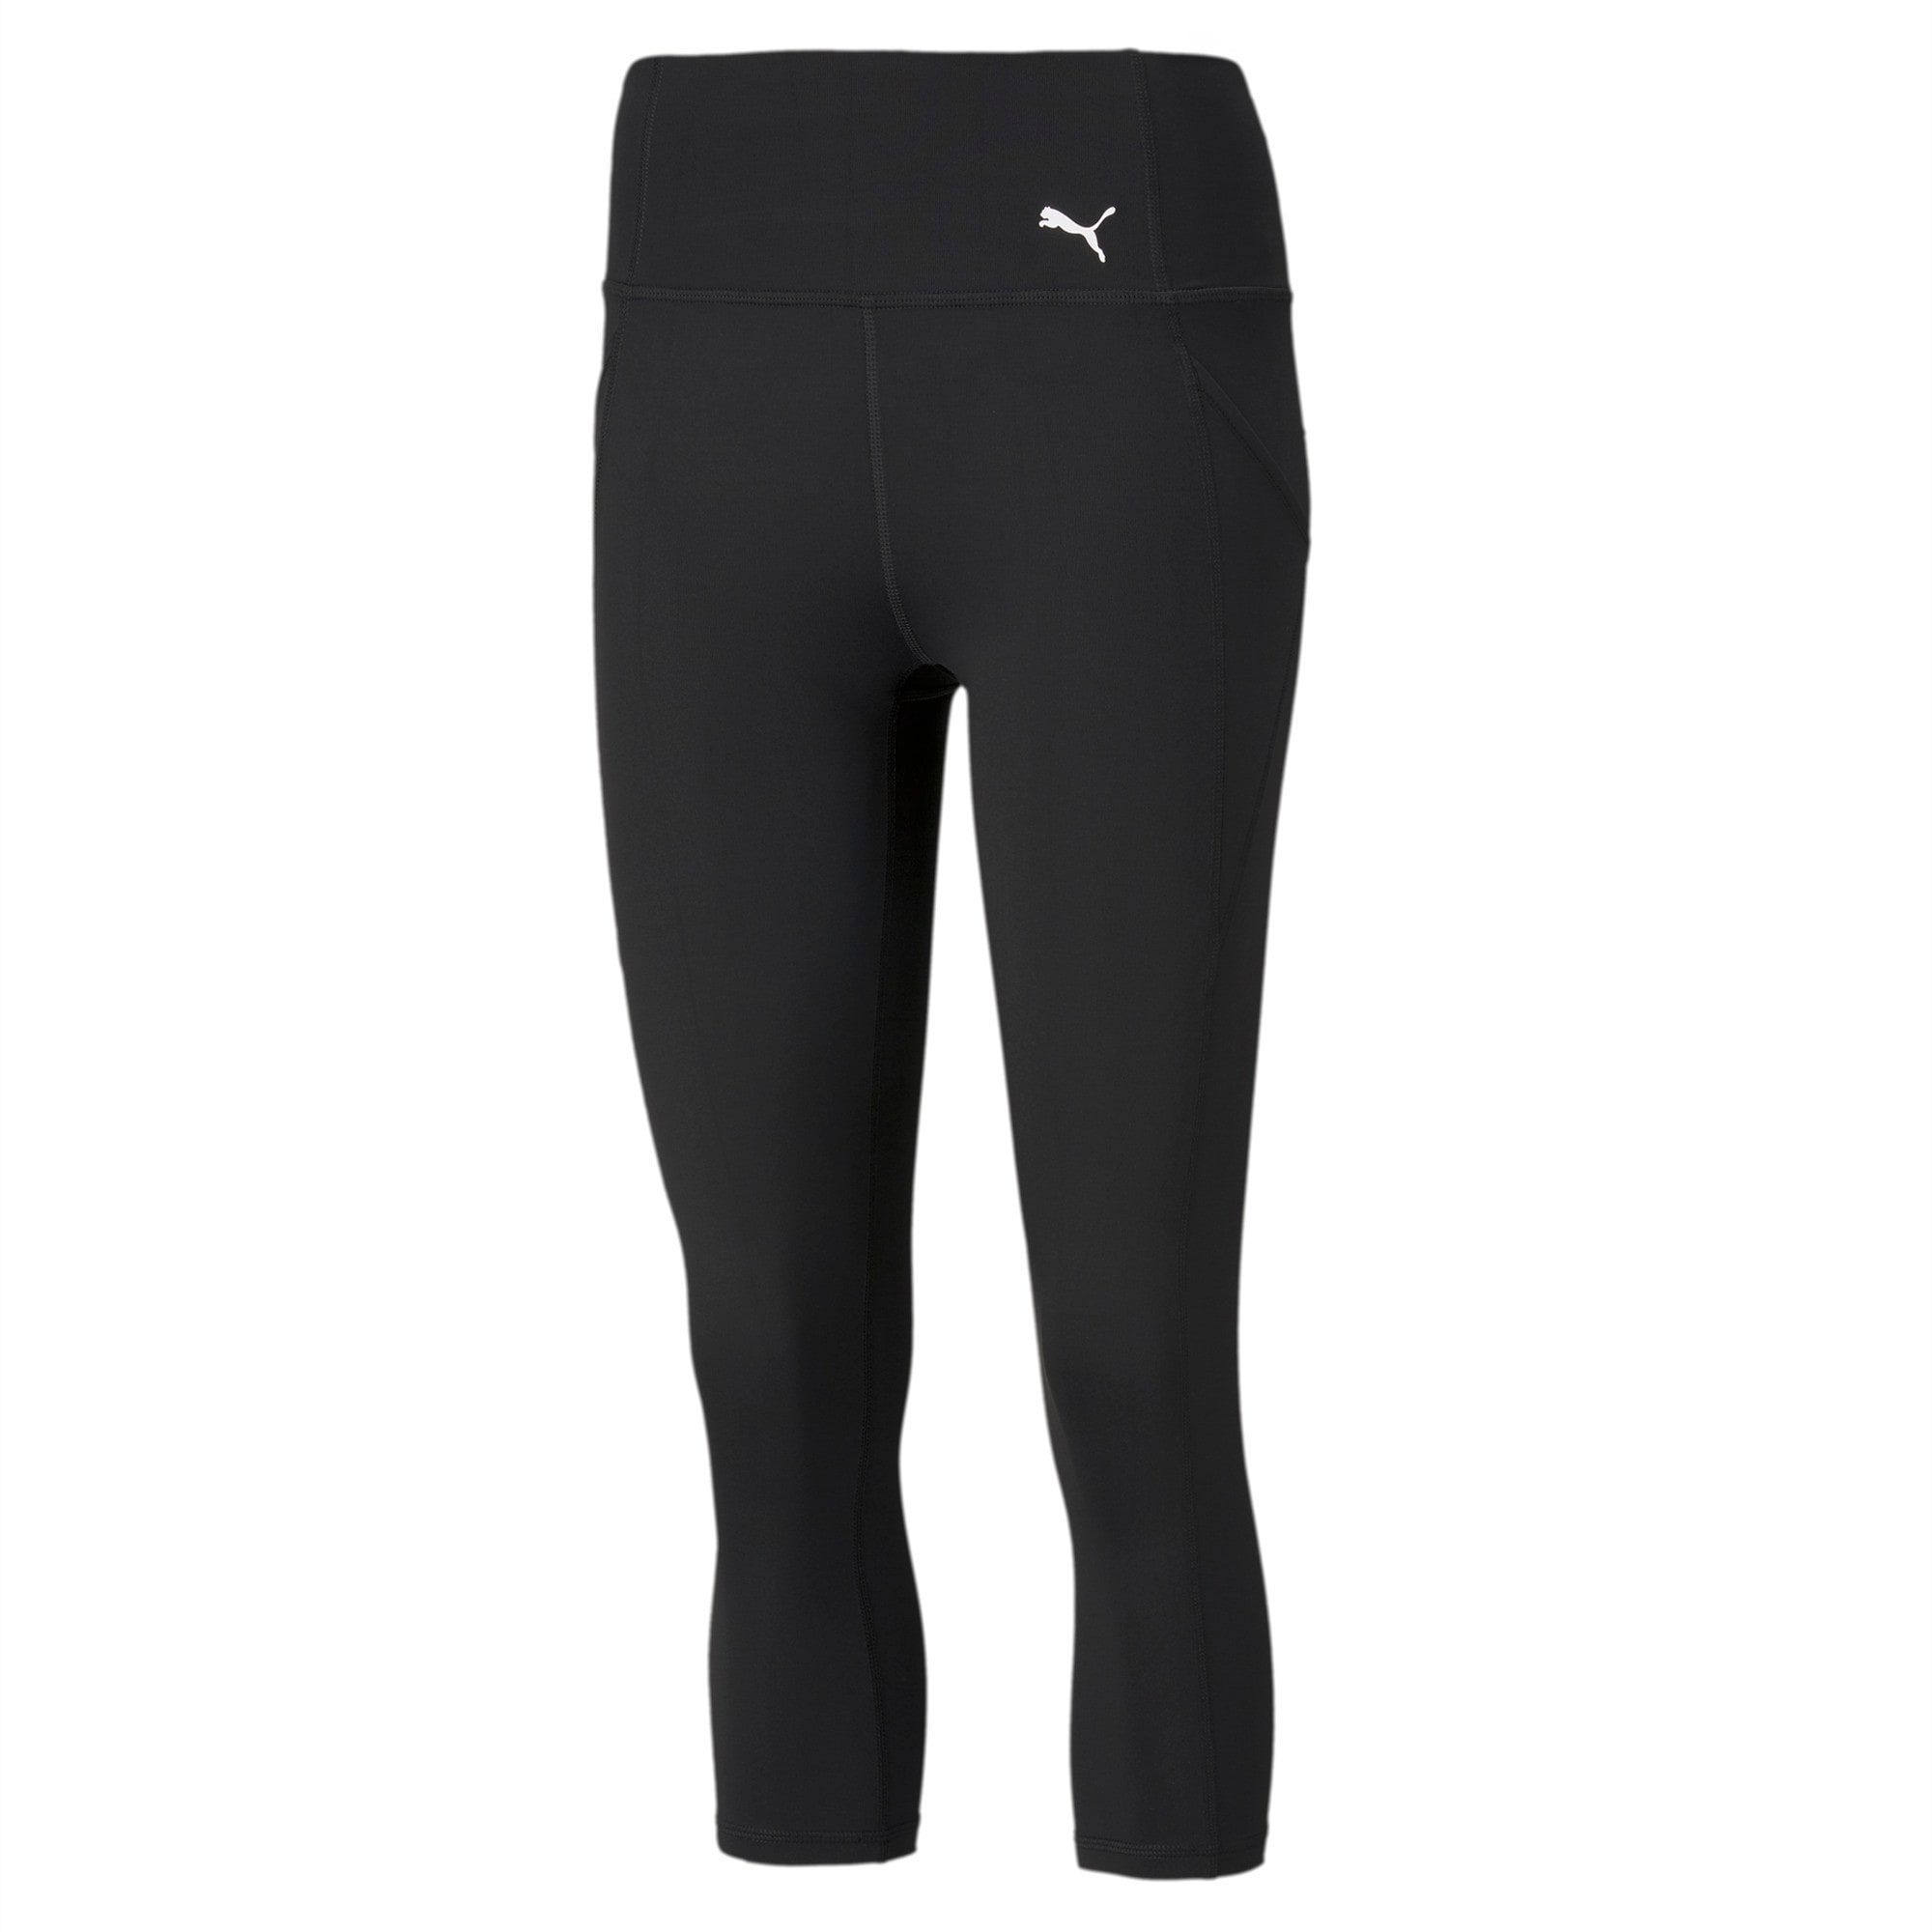 Puma Women's Train Forever 7/8 Tight Training Leggings in Mauvewood Size M  NWT